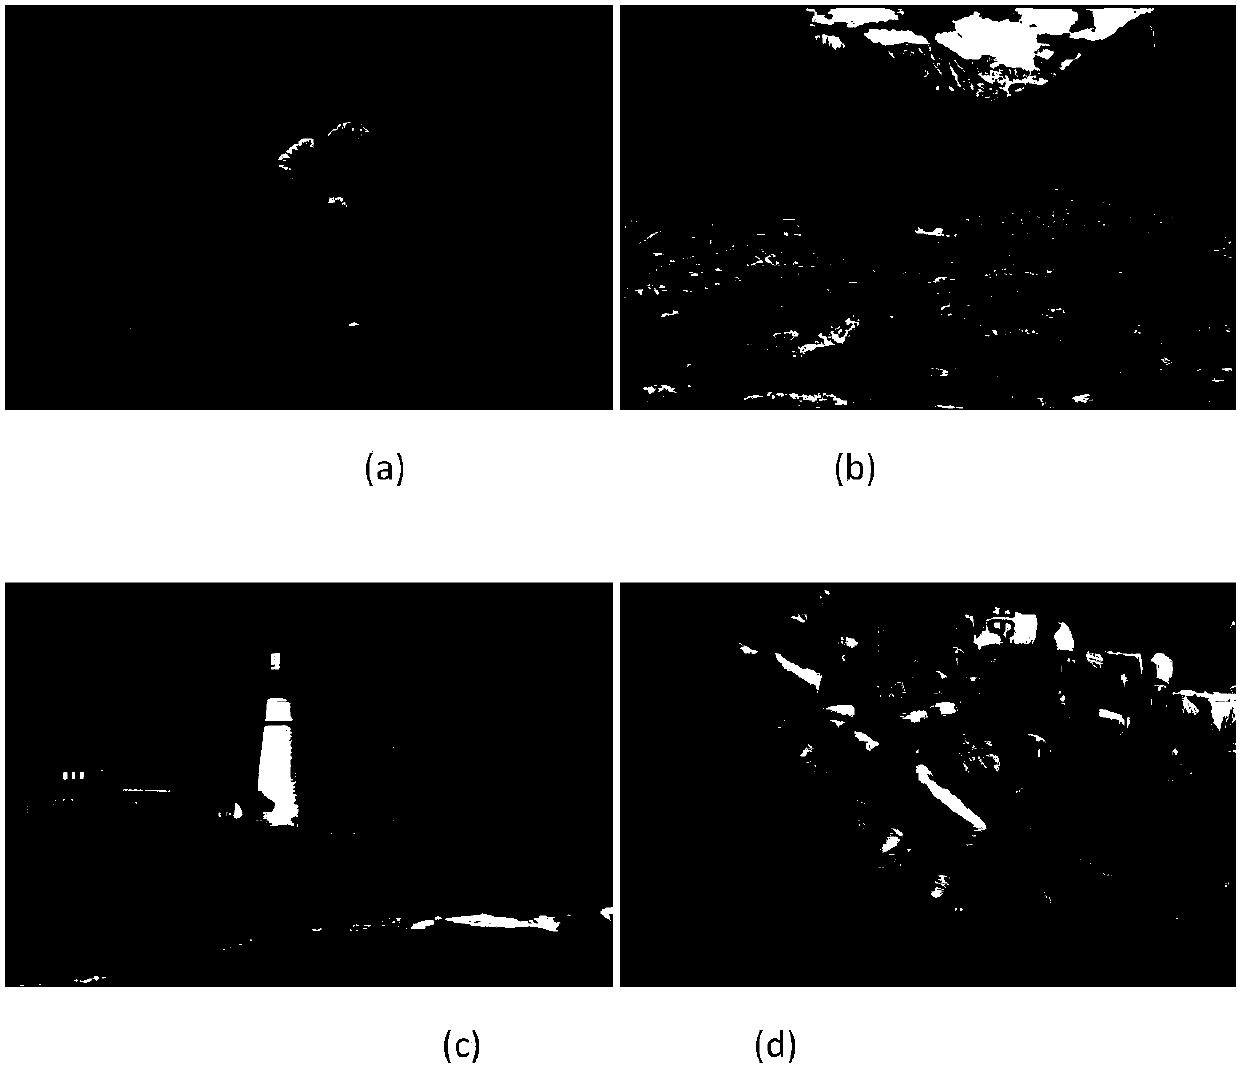 Full-reference mixed-distortion image quality evaluation method based on sparse decomposition residuals